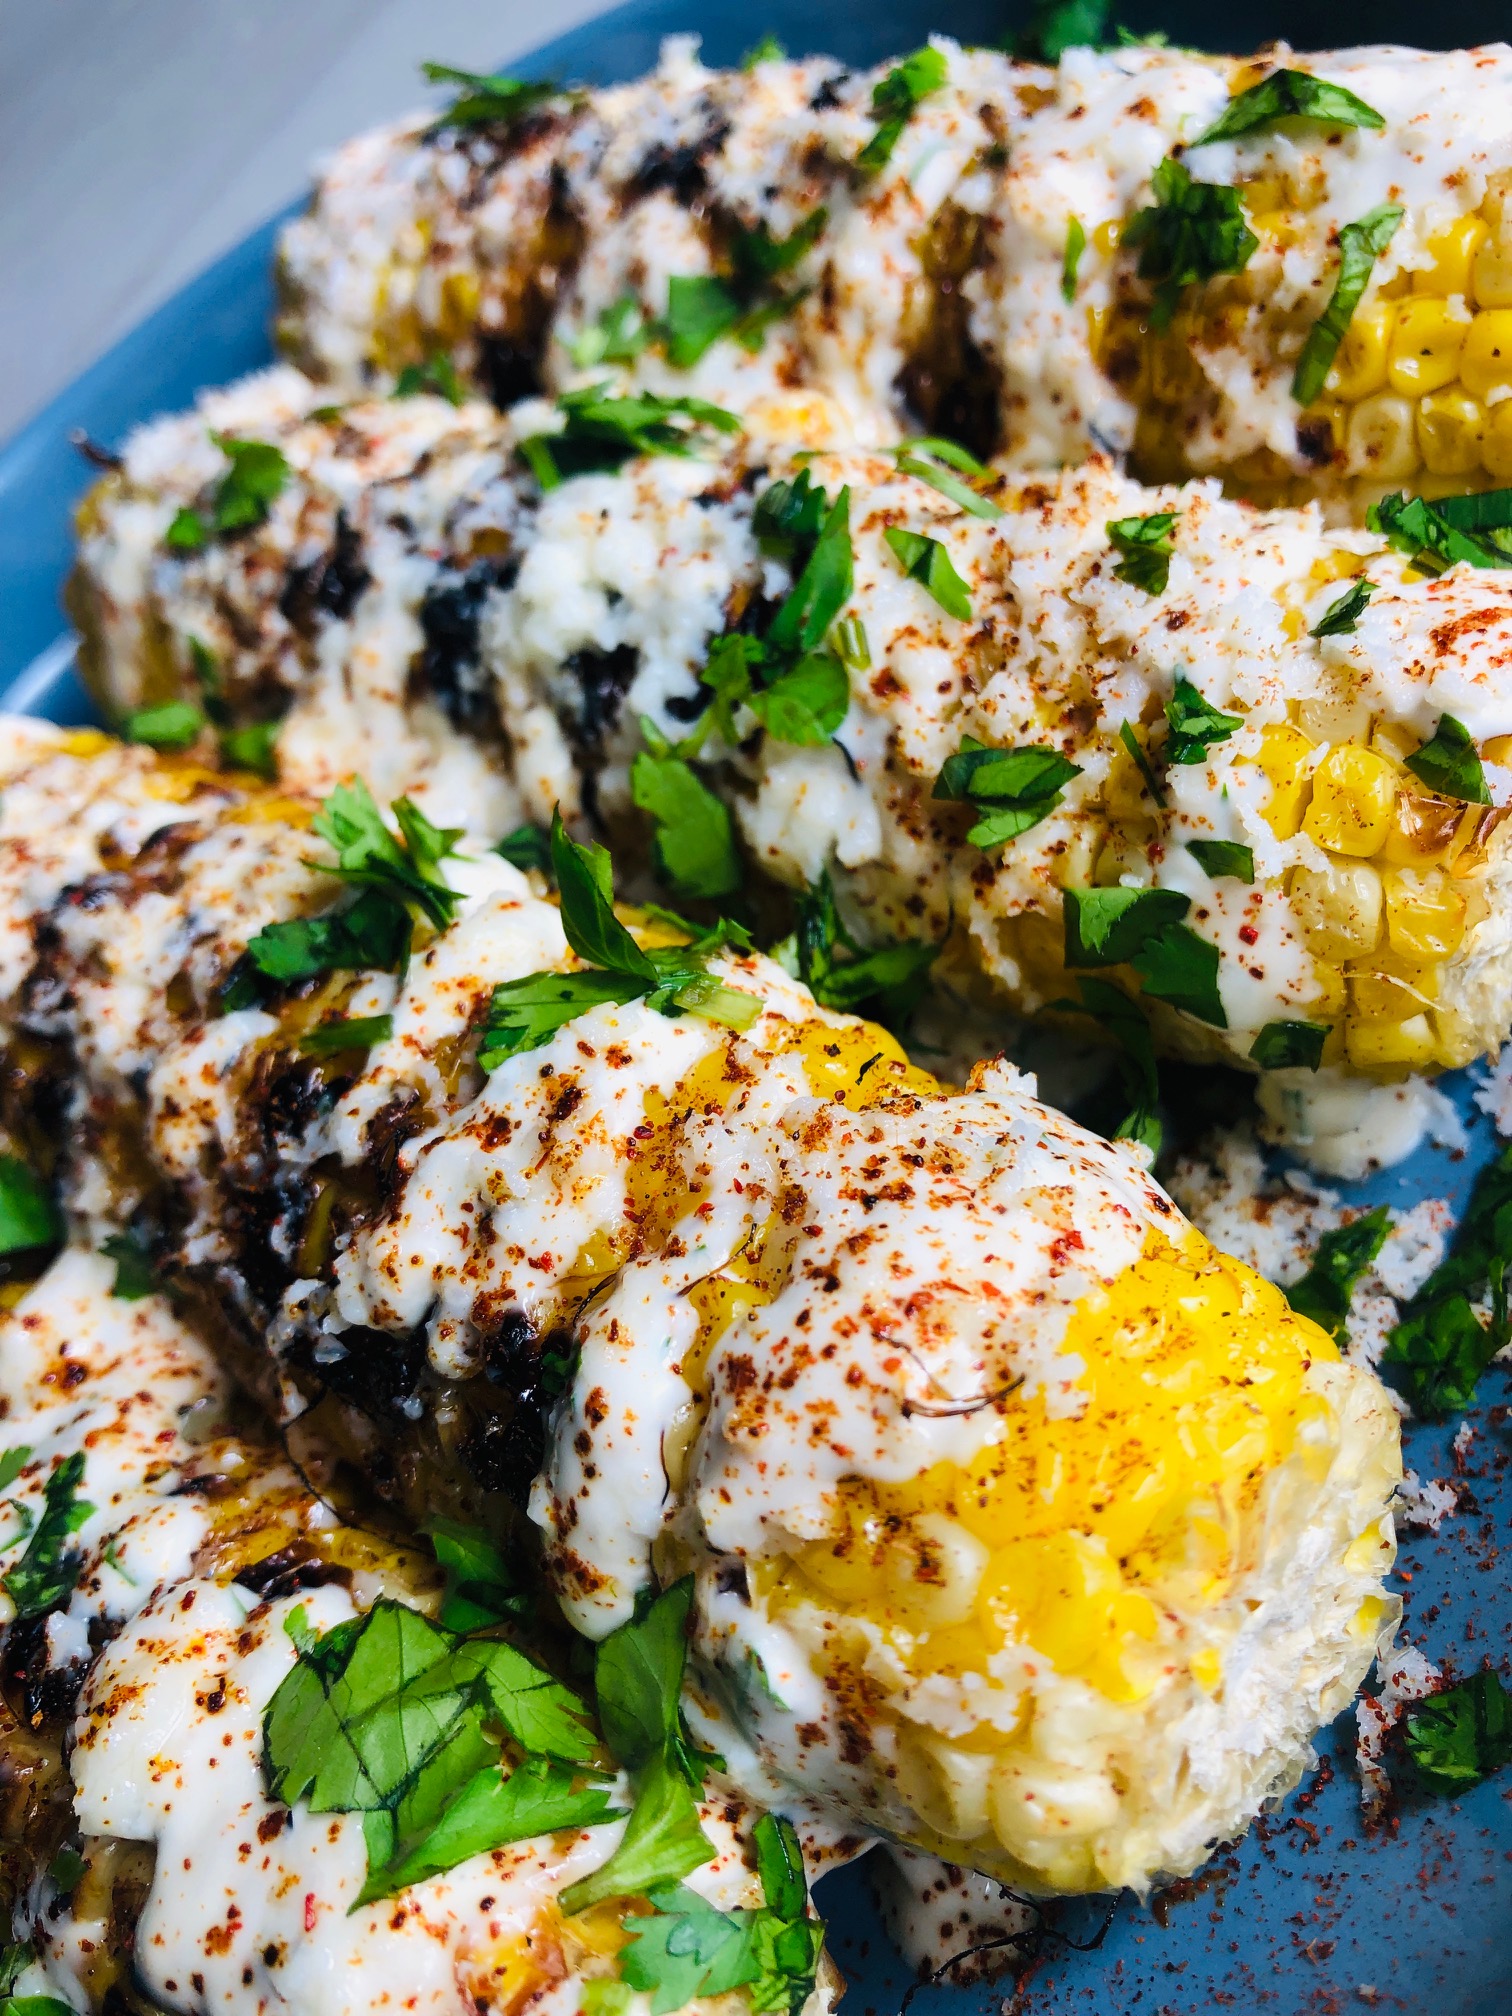 Grilled Corn on the Cob smothered in a crema sauce, sprinkled with chili powder and topped with cojita cheese and cilantro.